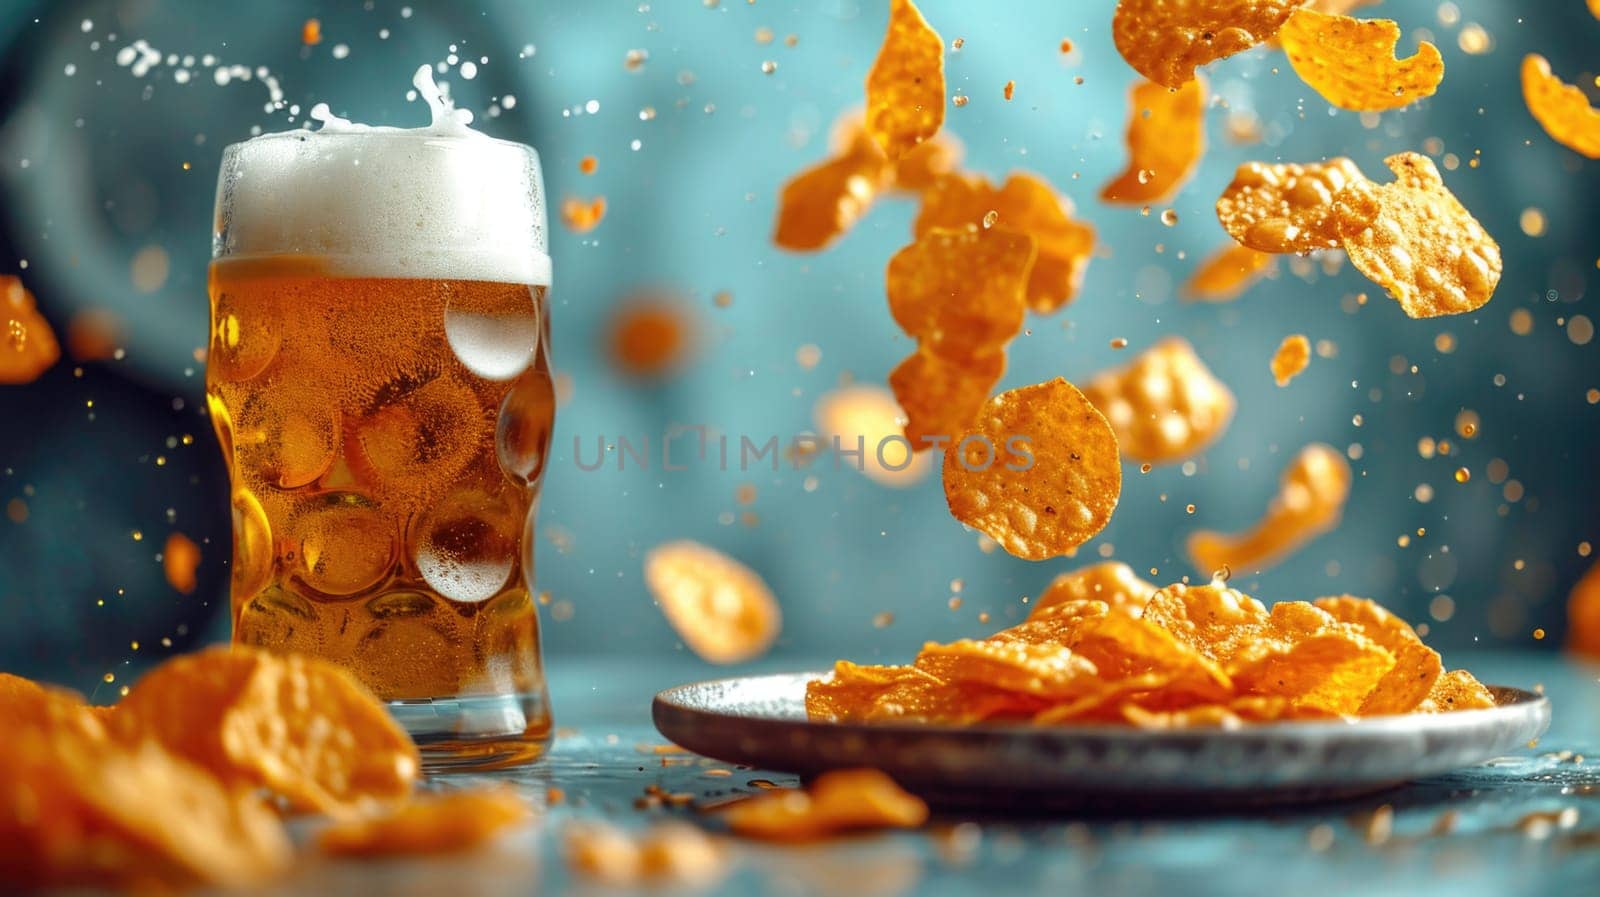 Chips hovering next to a glass of beer on a blue background by Yurich32